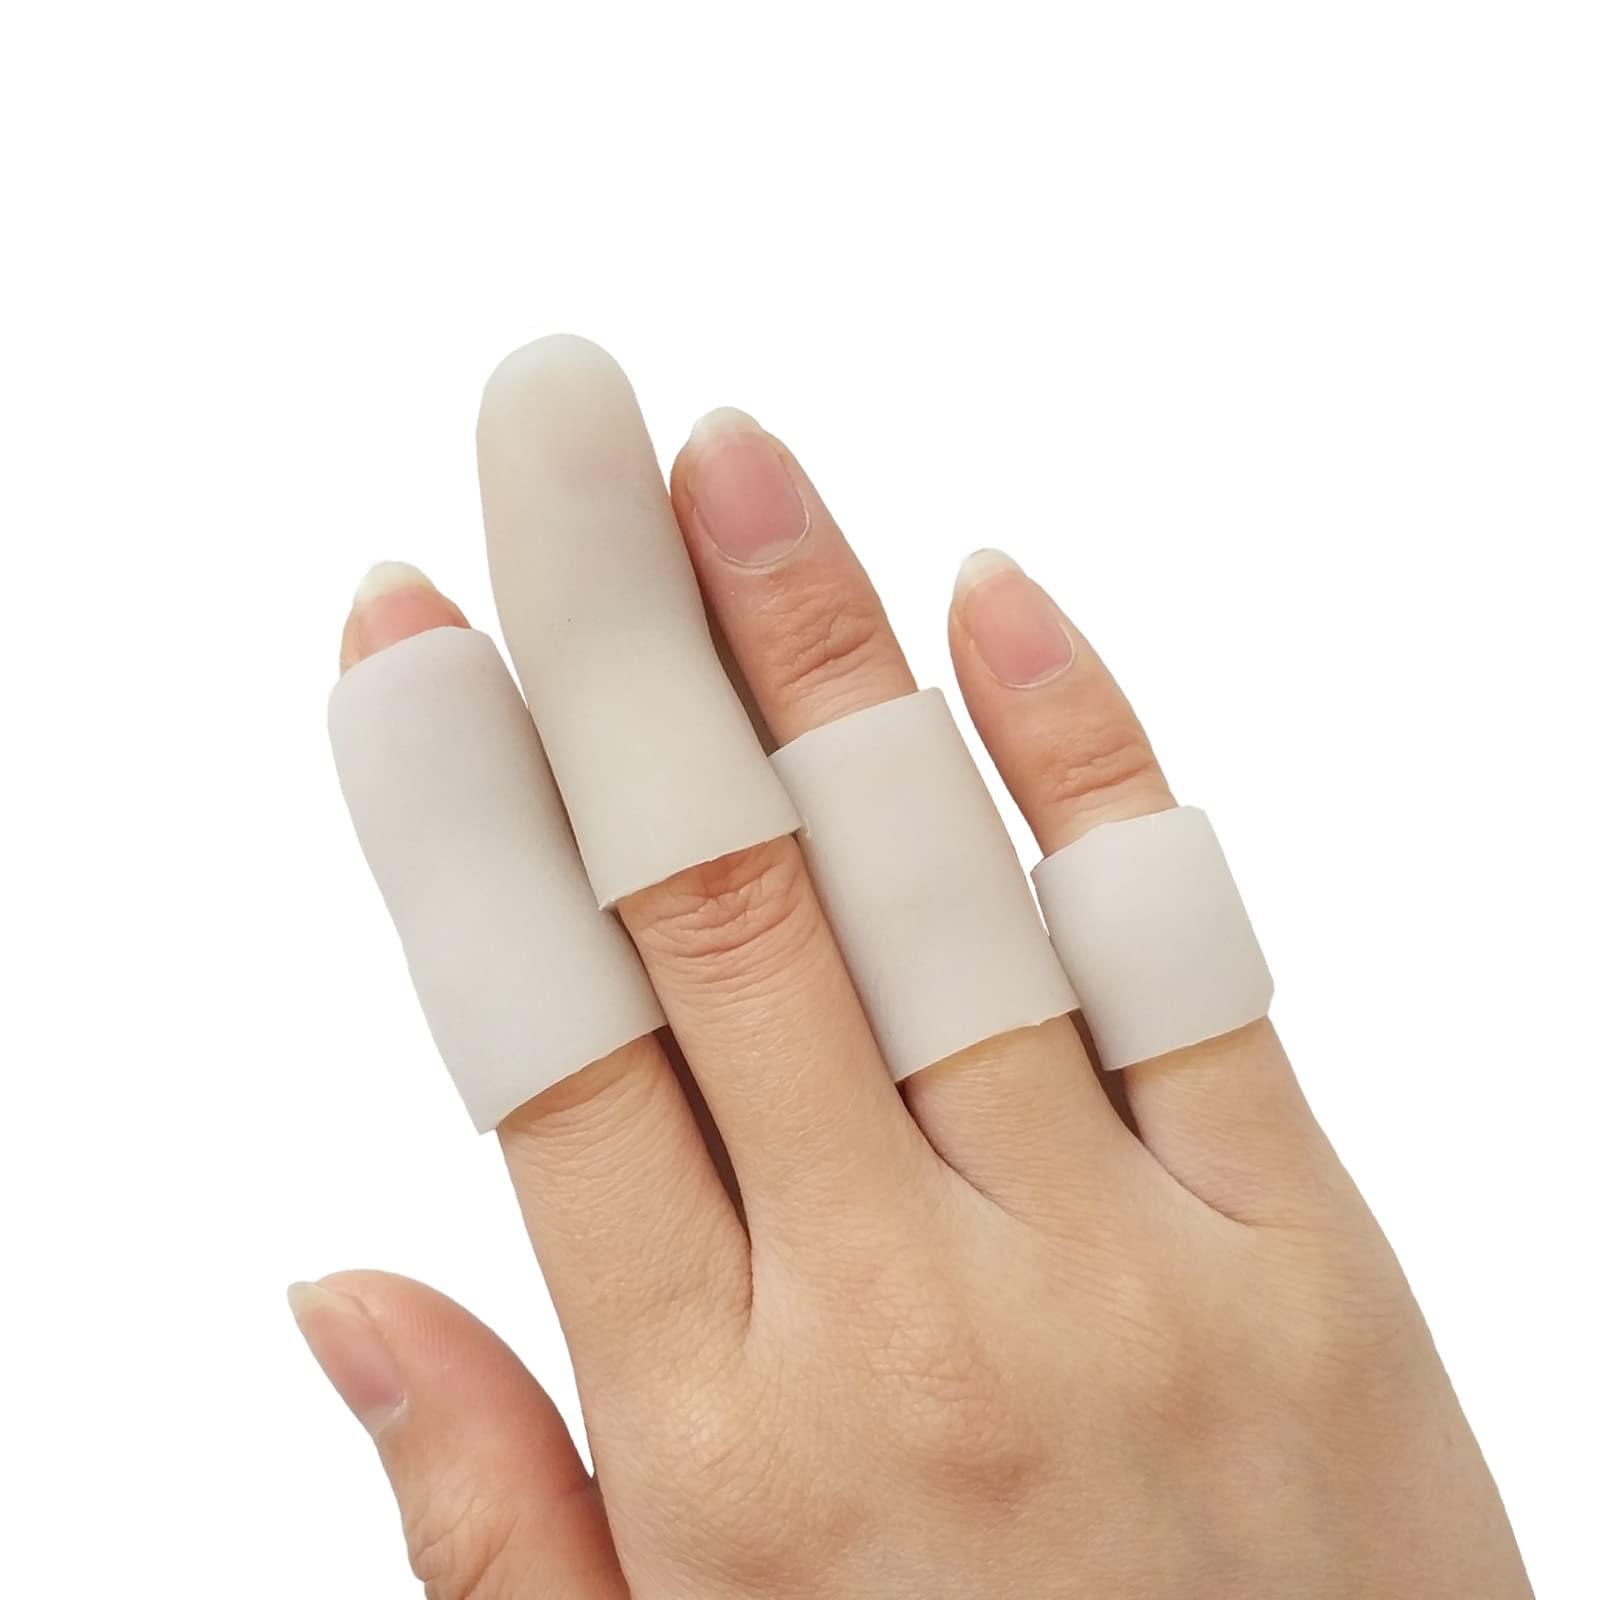 20 PCS Gel Finger Cots, Silicone Finger Protectors, Rubber Finger Covers  for Dry Skin, Gel Finger Protectors for Cracked Knitting Cuts, Washable and  Reuse.